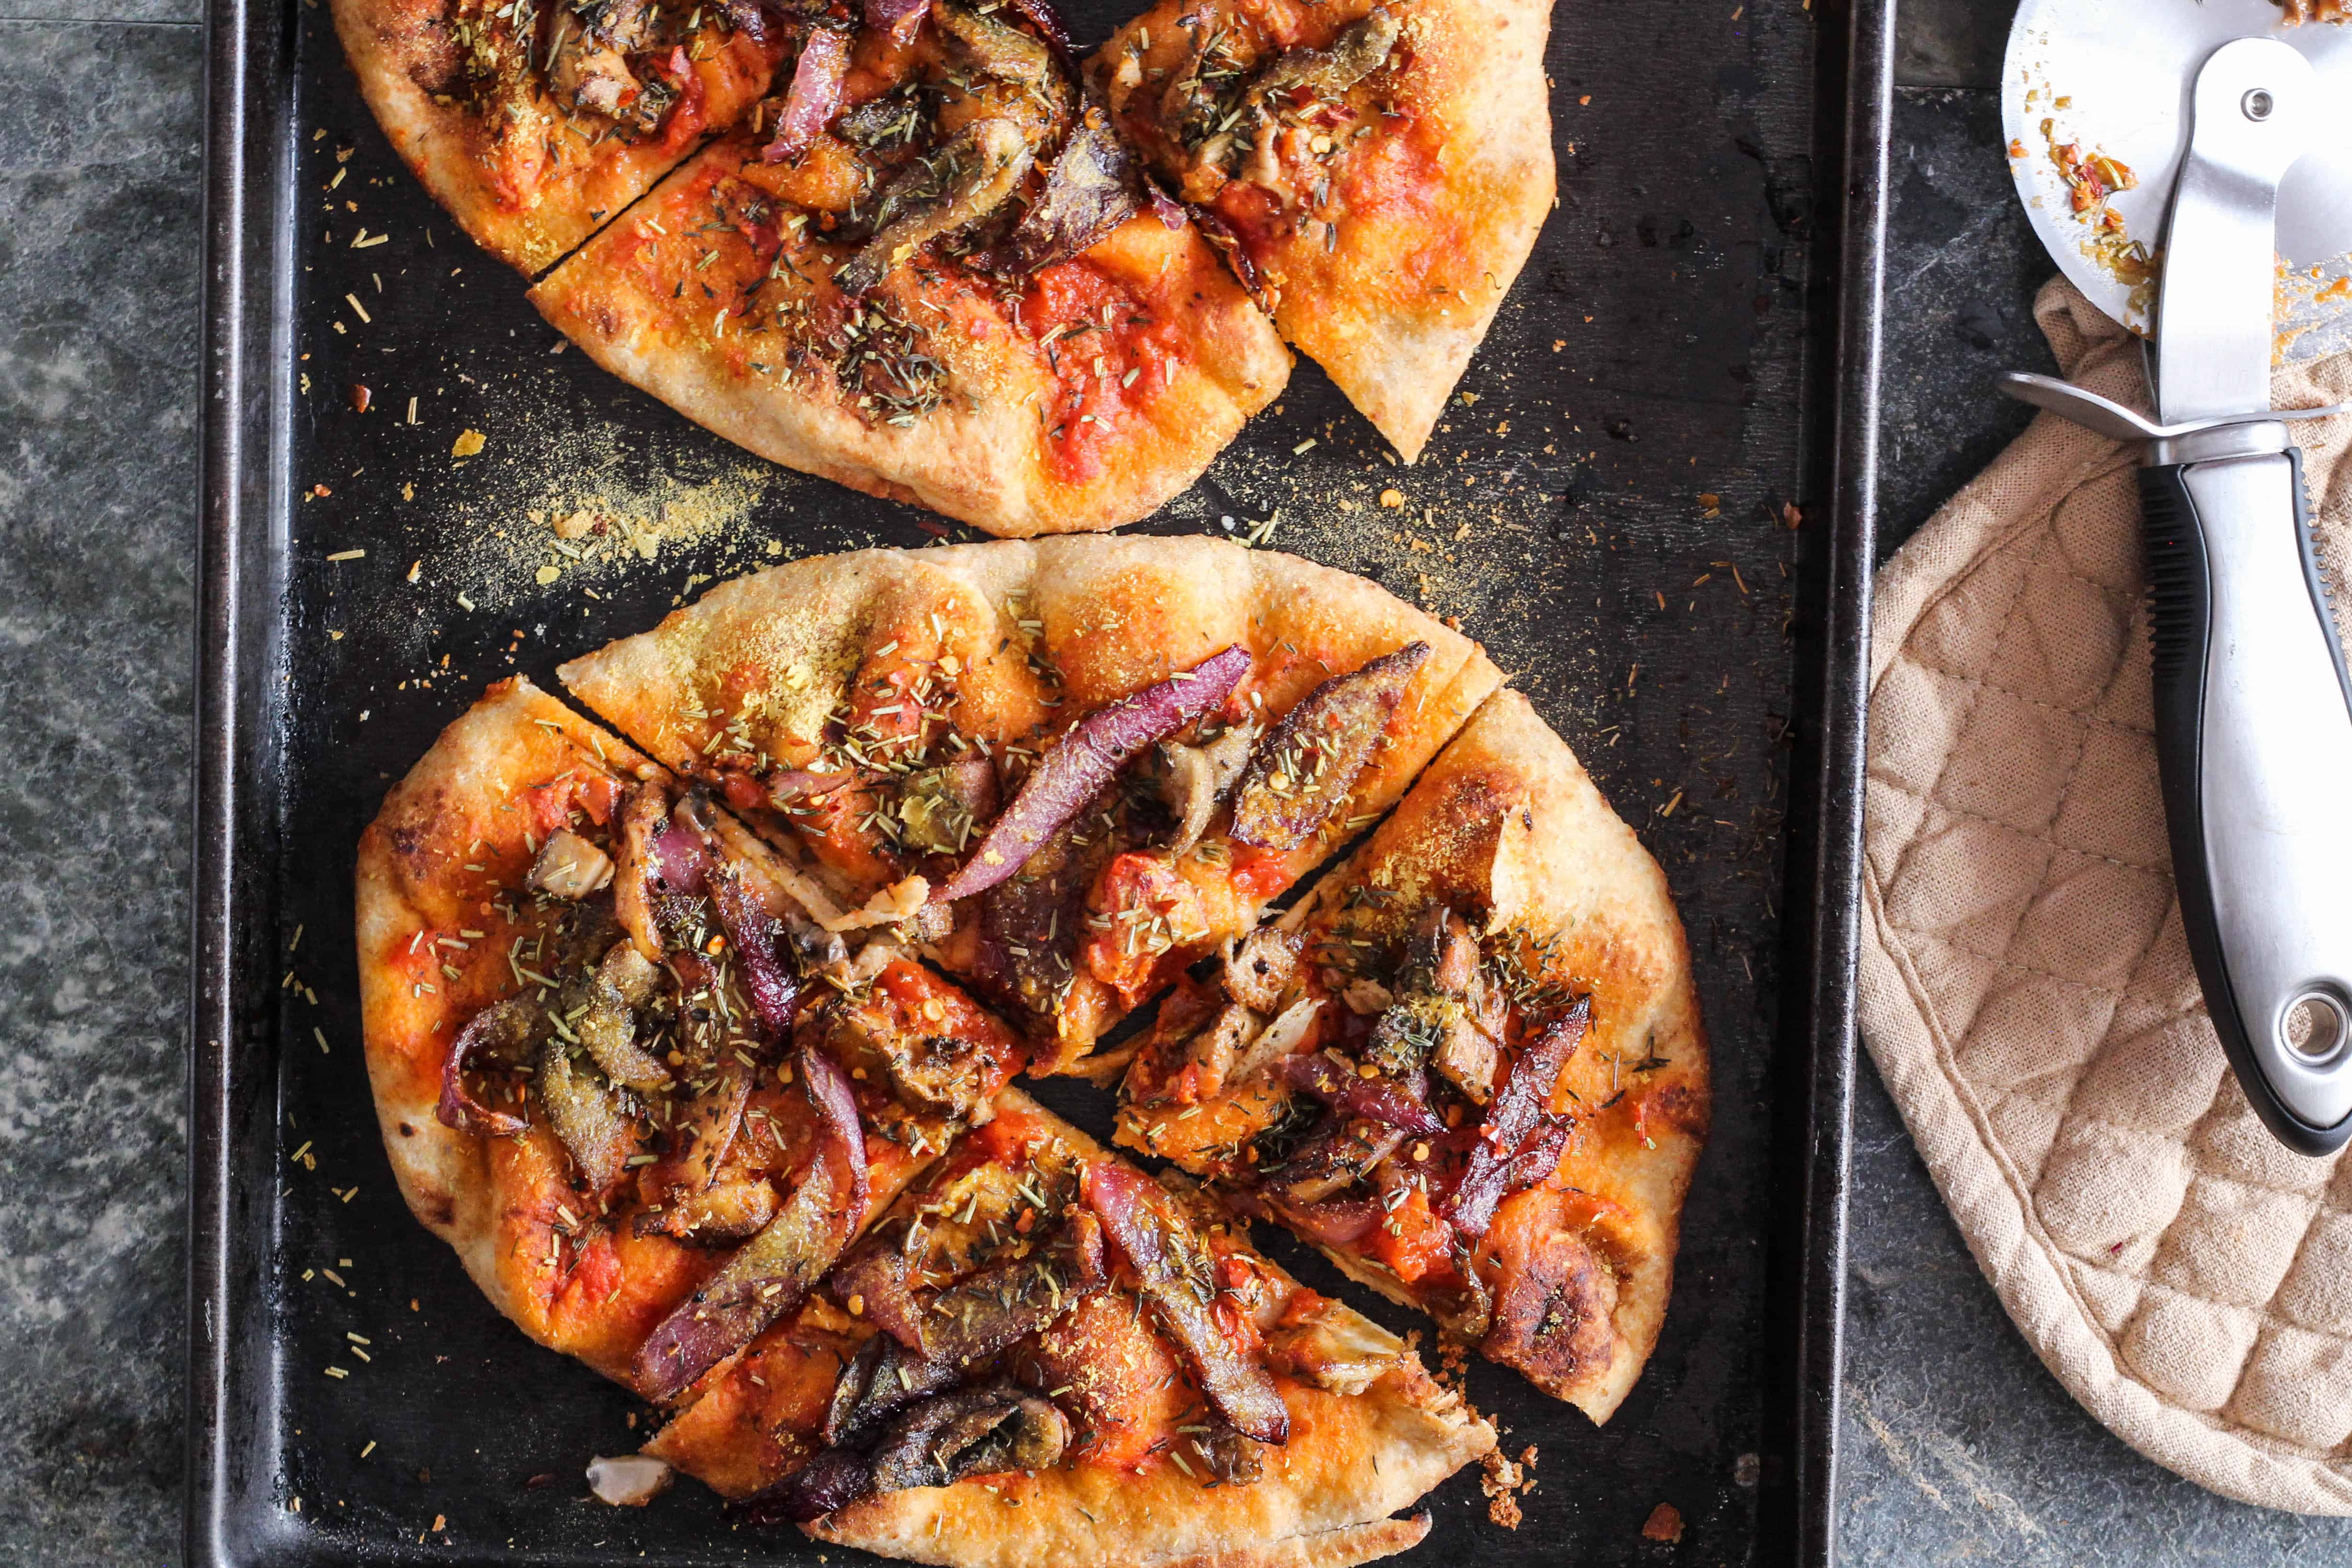 Vegan naan pizza is a healthy, fun, and delicious weeknight meal that the entire family will love. Recipe + sign up for a free plant-based cookbook!